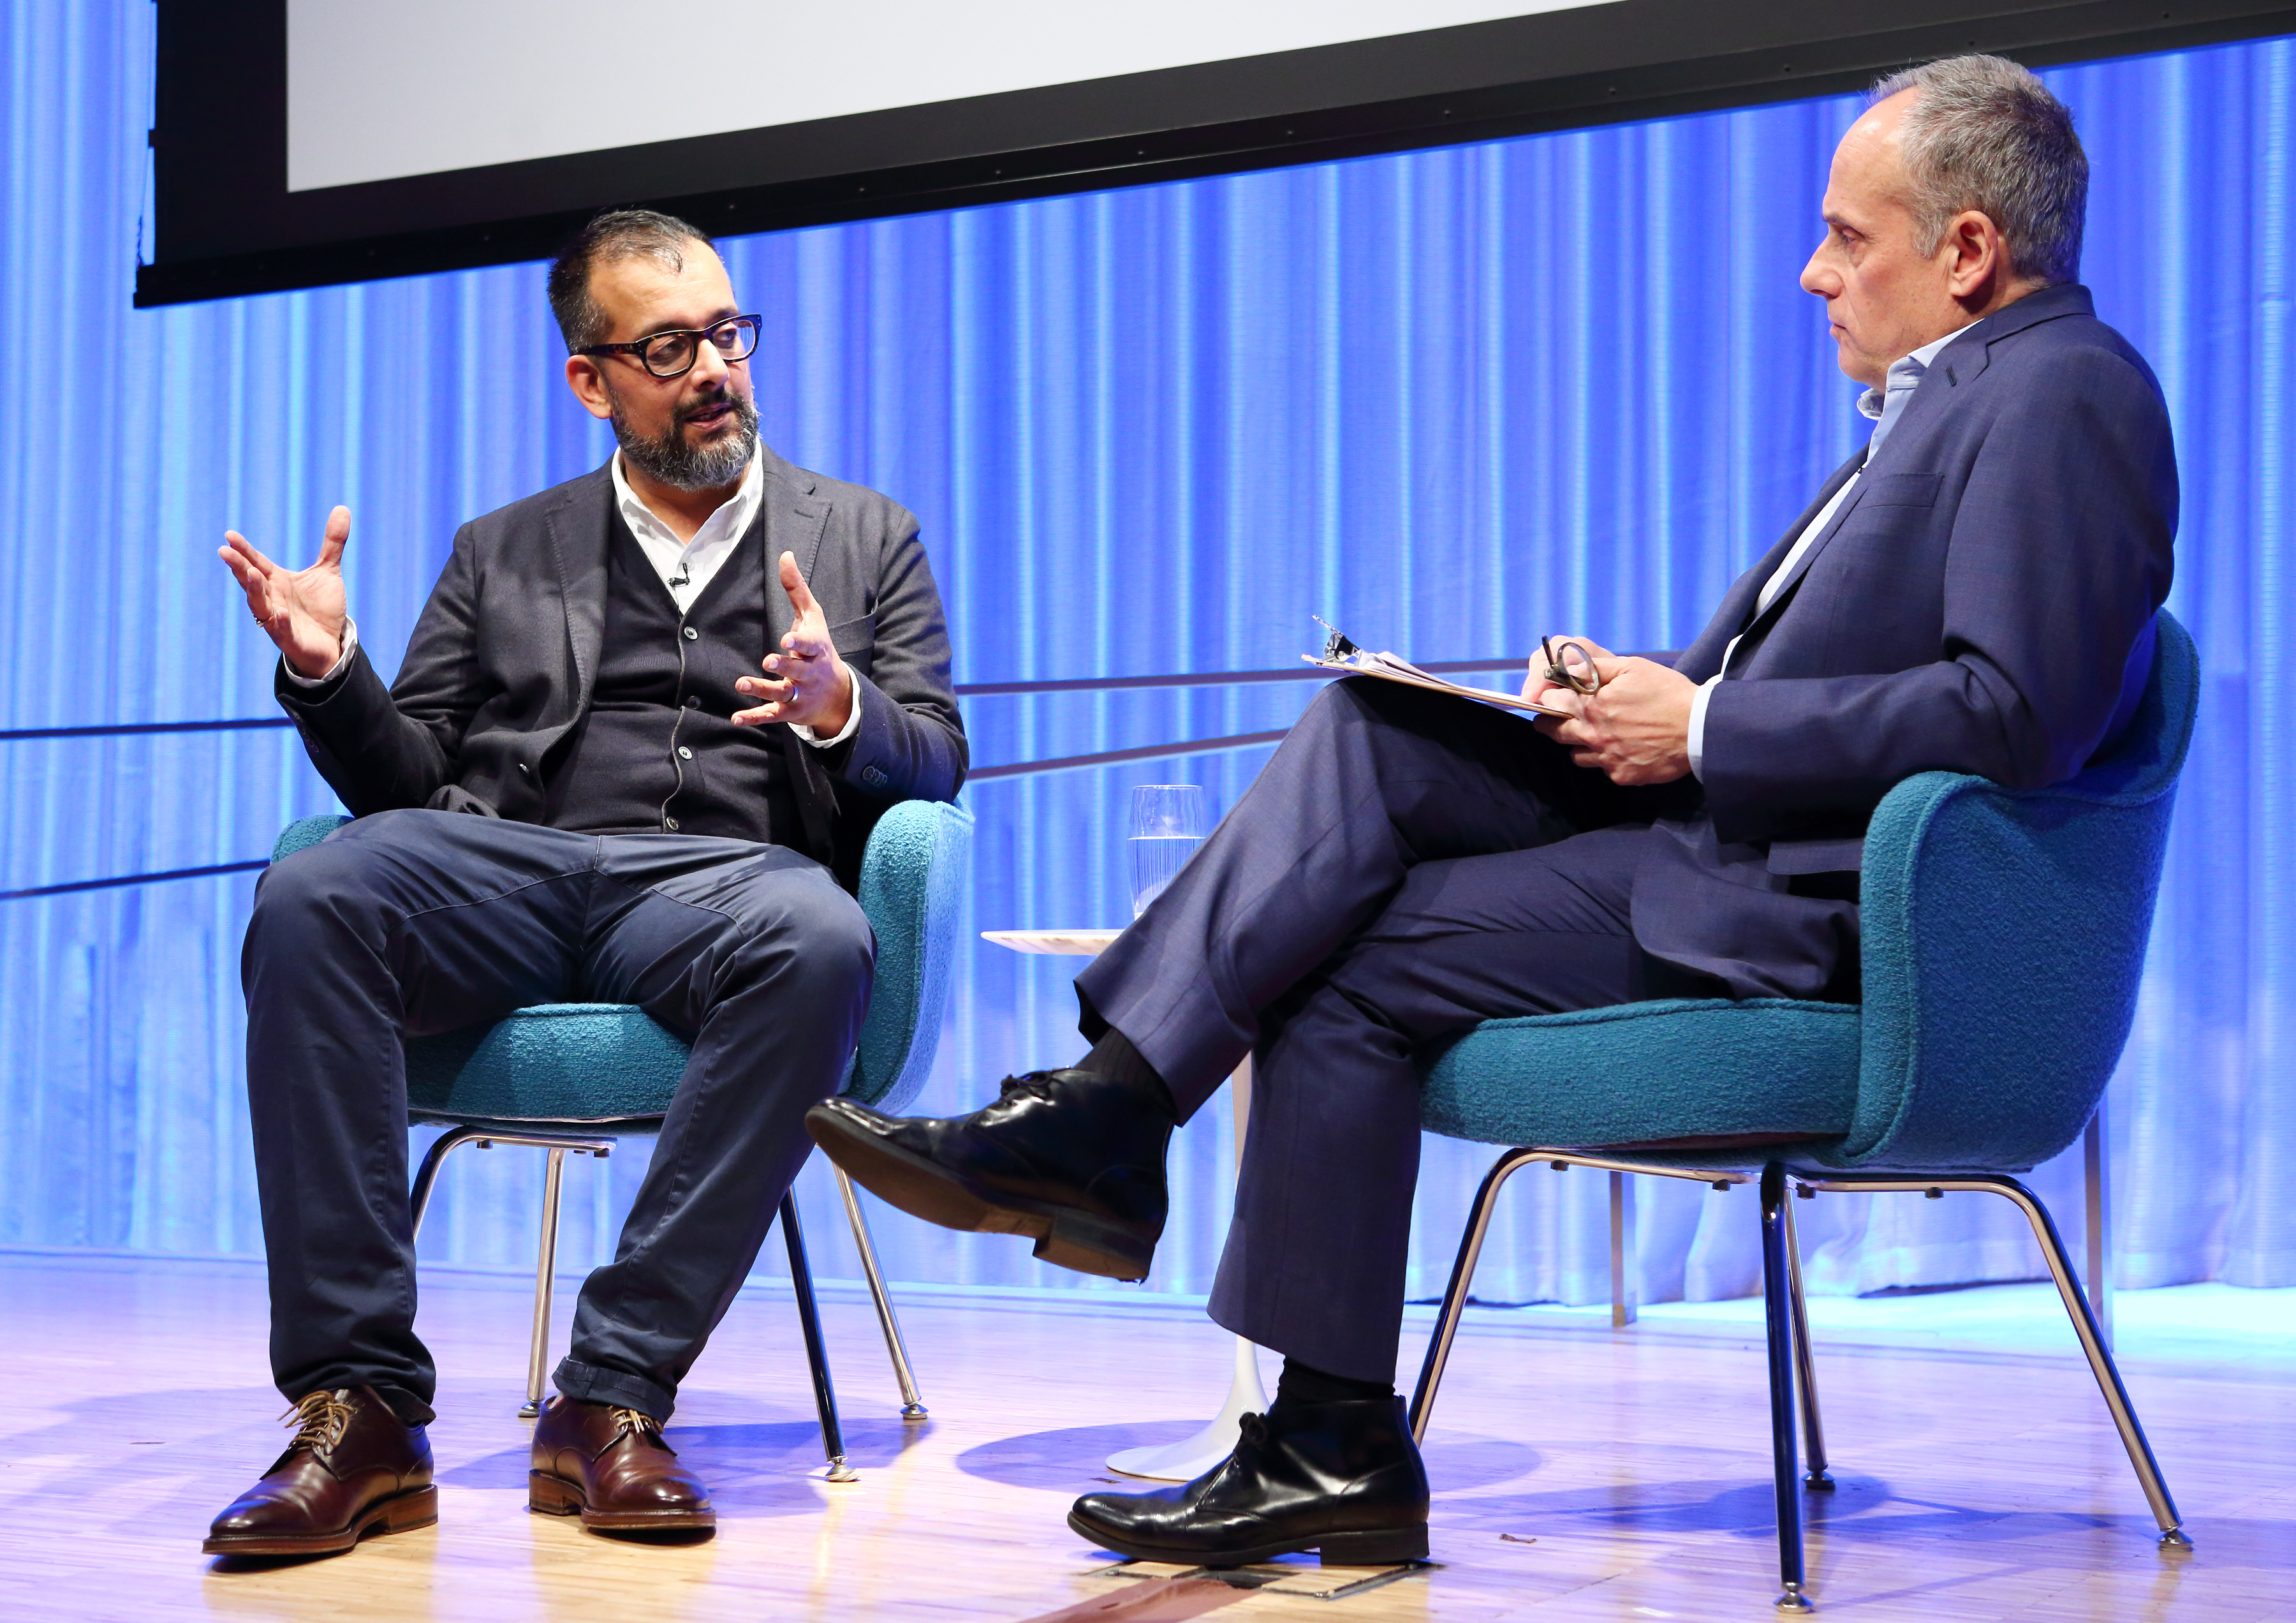 Vice co-founder Suroosh Alvi gestures as he speaks with Clifford Chanin, executive vice president and deputy director for museum programs, onstage during a public program at the Museum auditorium.